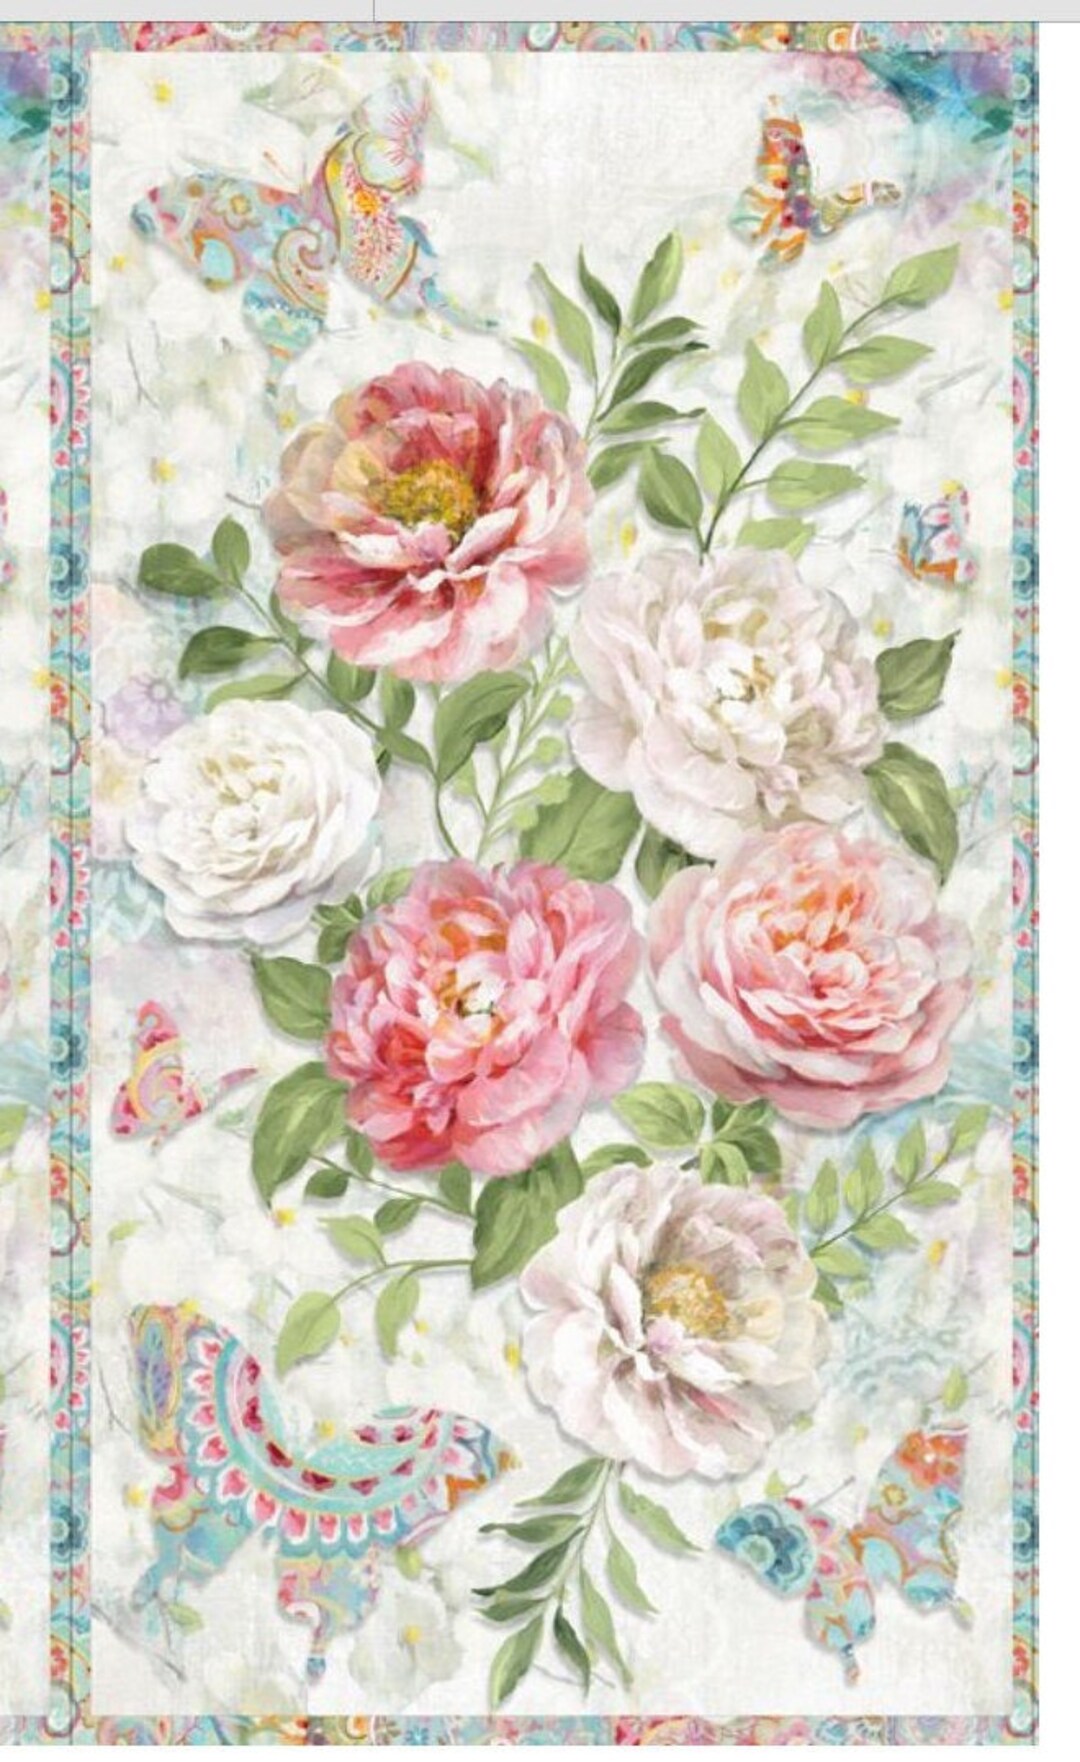 Wild Blush Collection Floral Print Cotton Fabric by Wilmington - Etsy